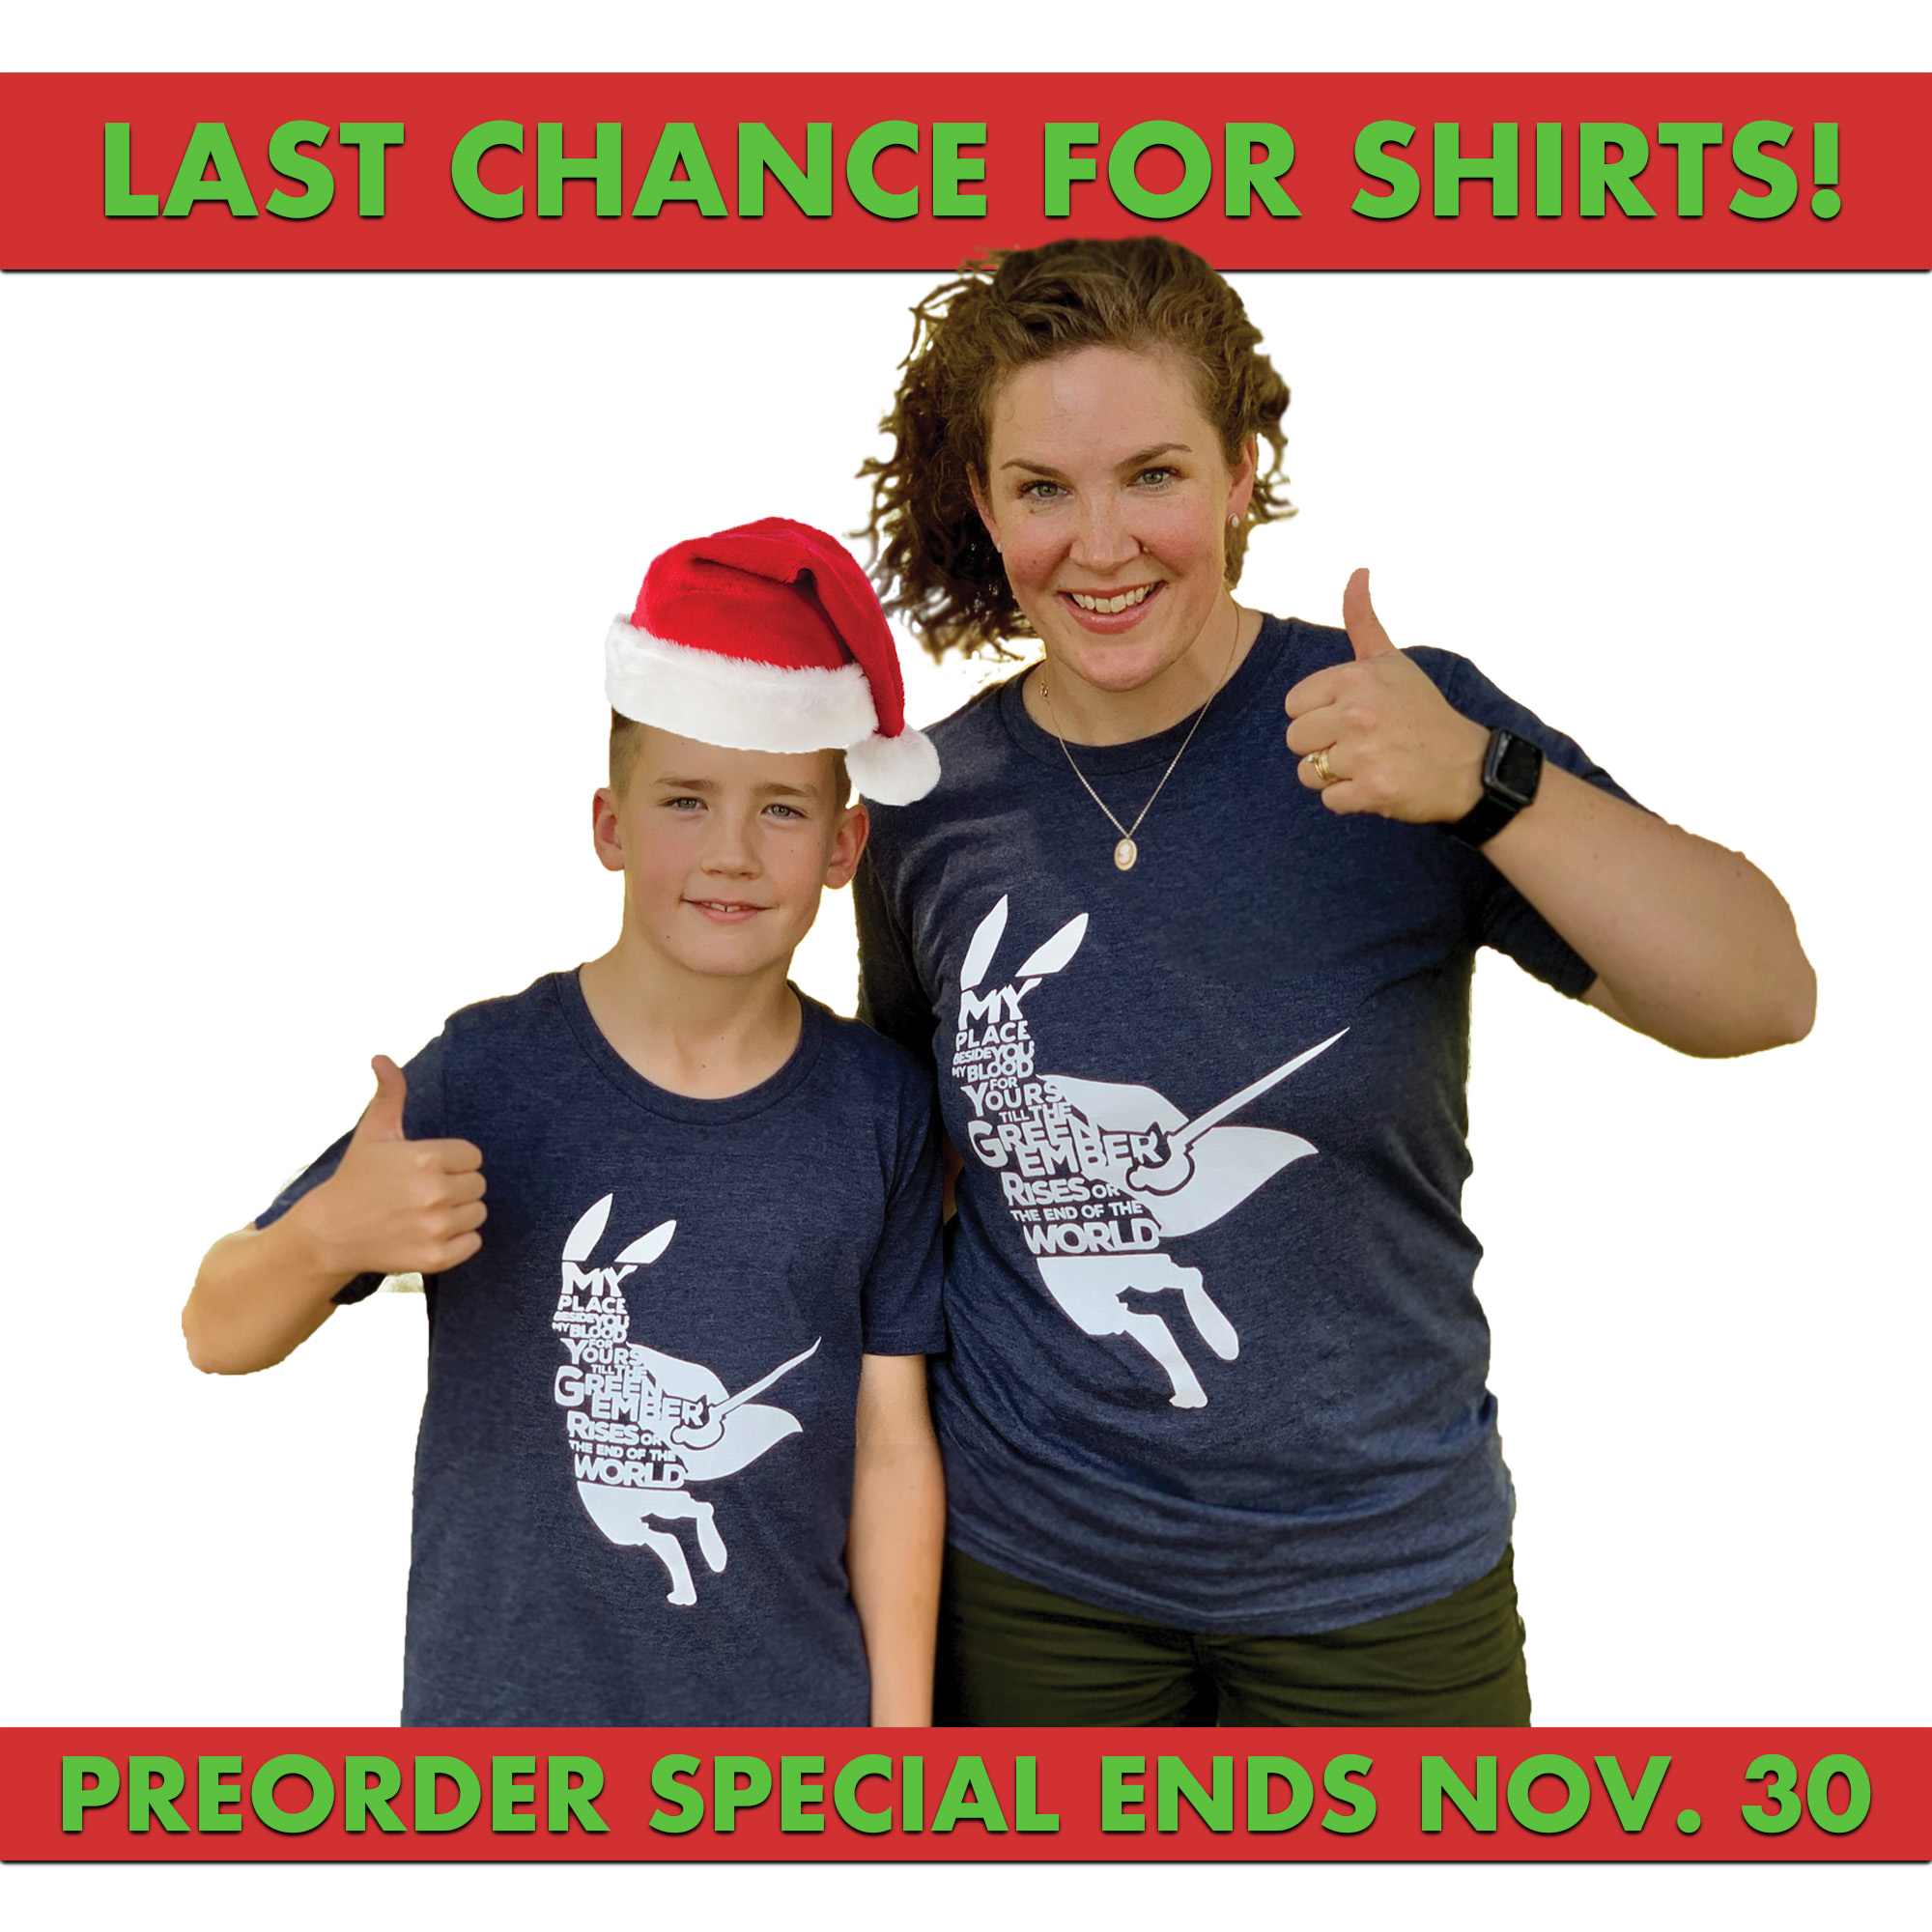 Last Chance to Preorder “My Place Beside You…” Shirts for Christmas! Ends Nov 30.